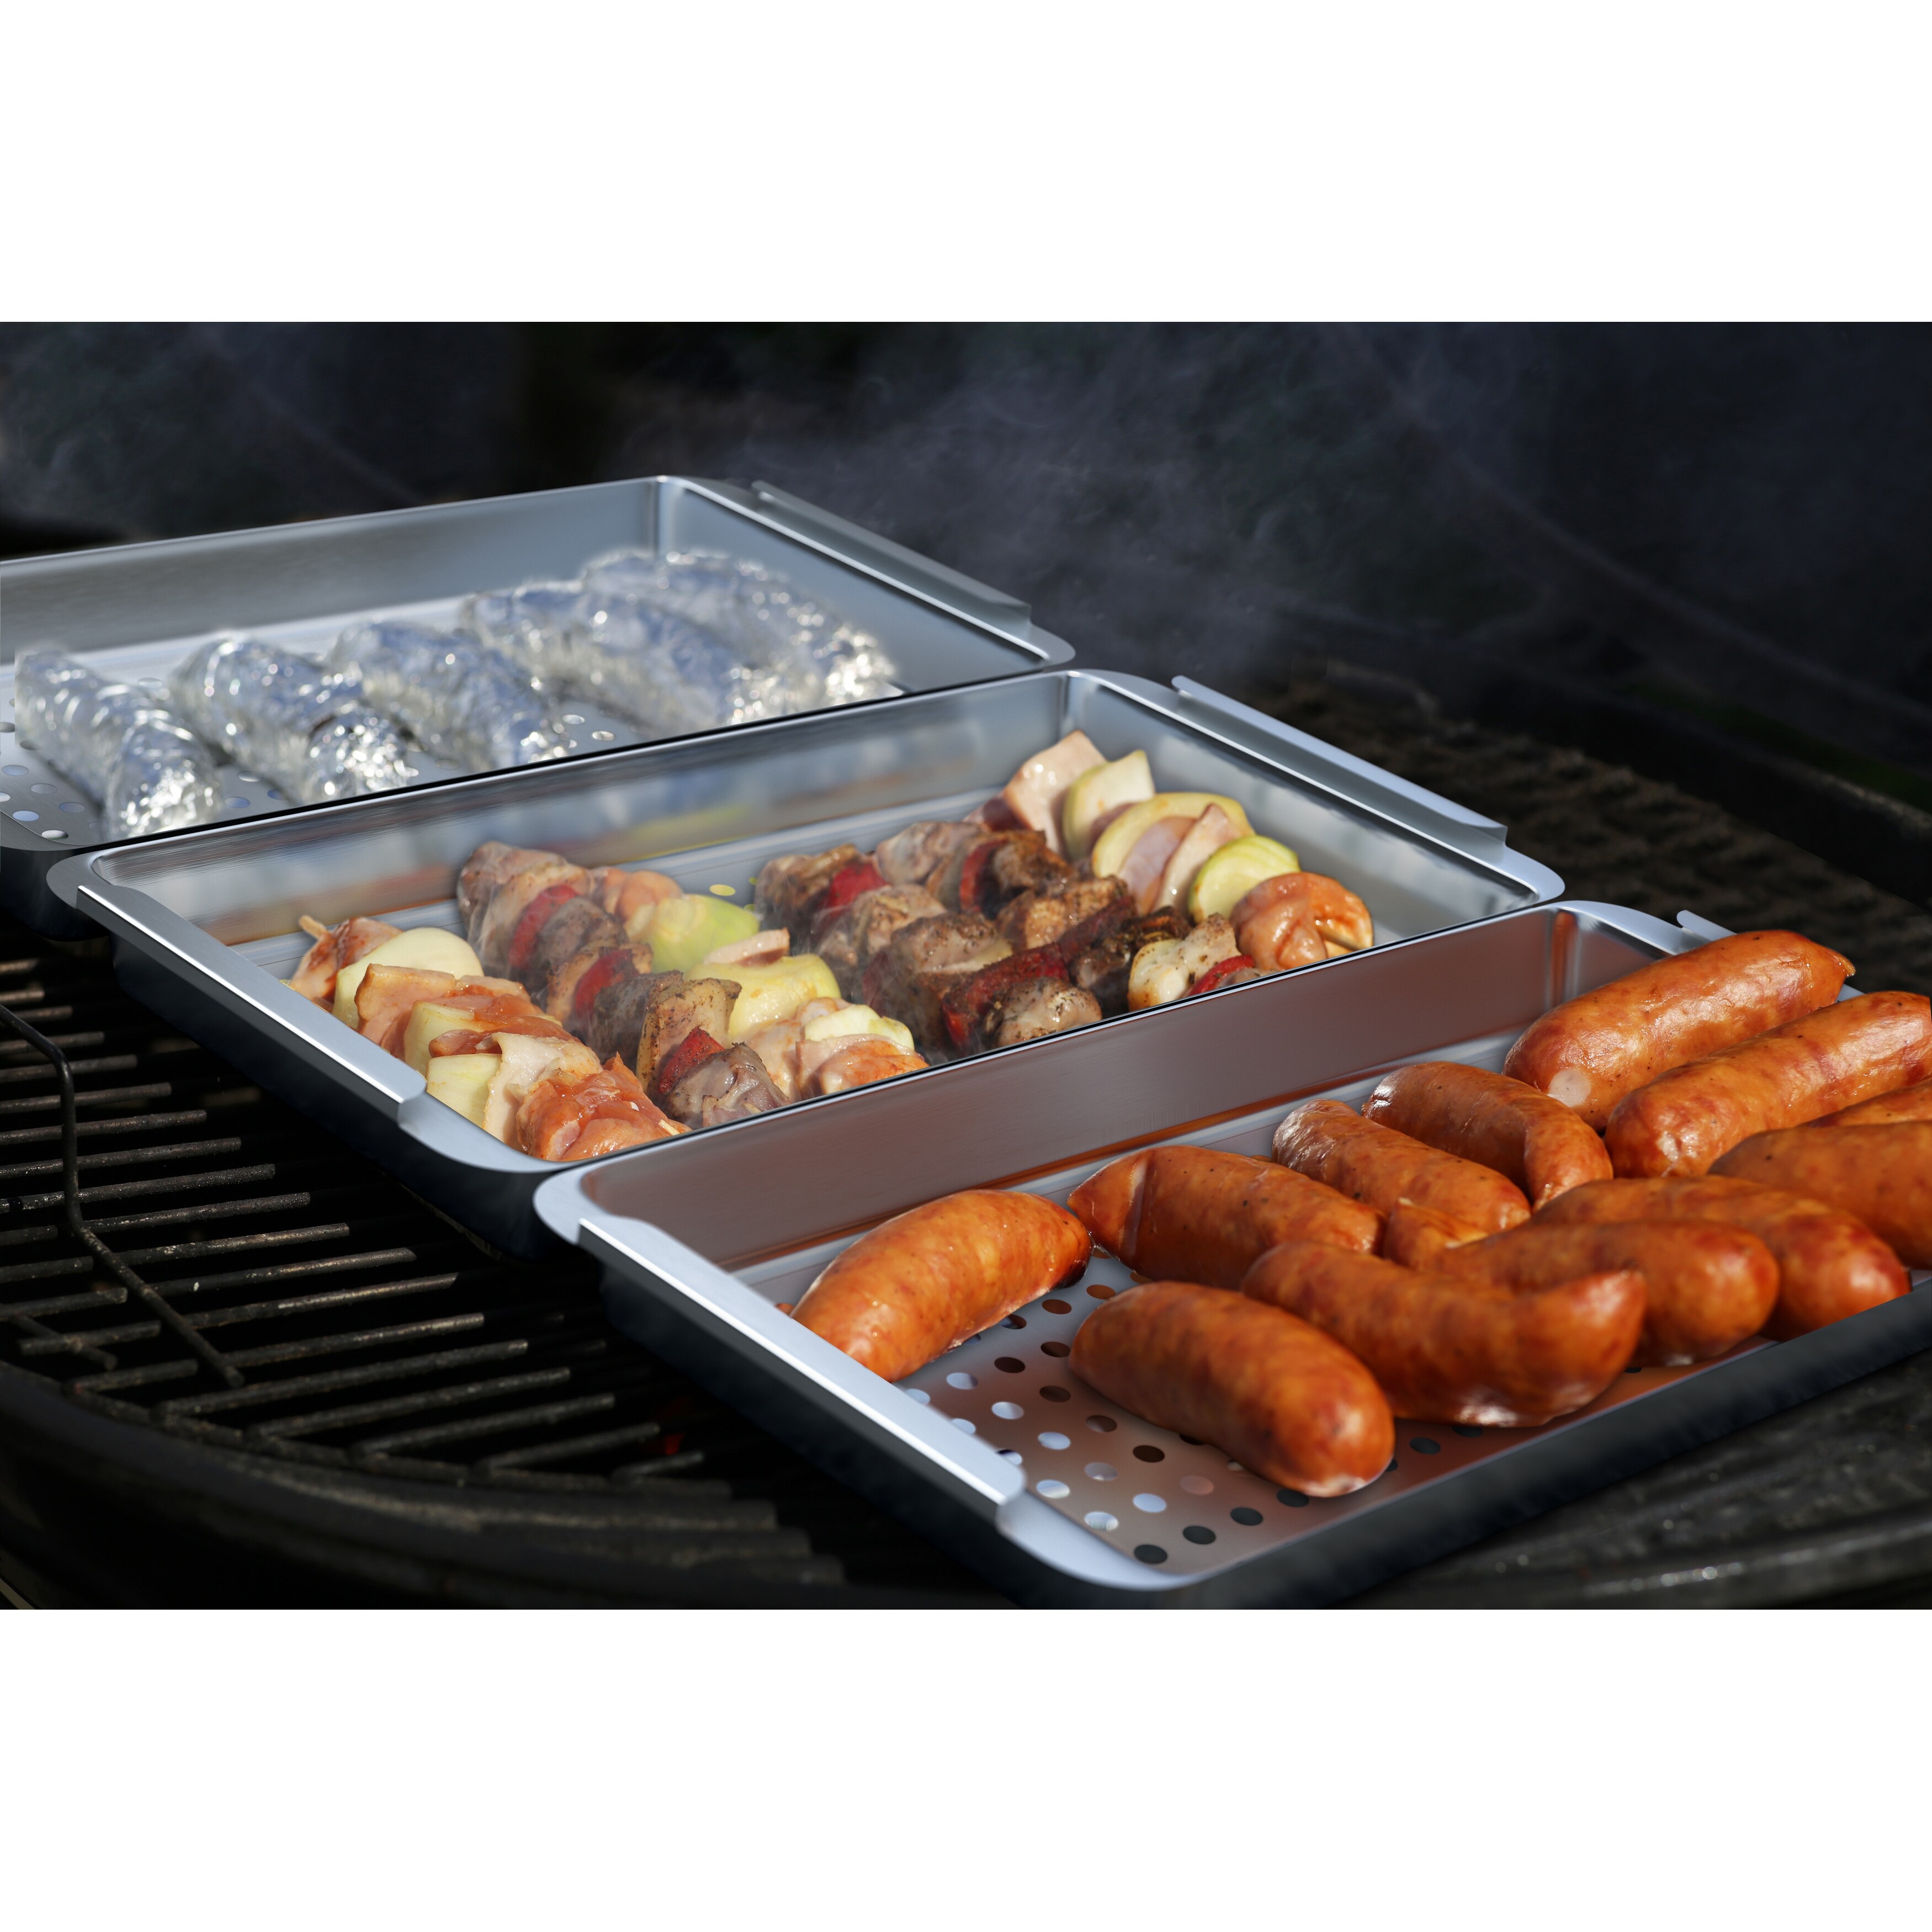 https://ak1.ostkcdn.com/images/products/is/images/direct/8e2ce9b95051273ea9ca33aa7a66ef20c33720fd/Yukon-Glory-BBQ-N-SERVE-Grill-Basket-Set-Includes-3-Grilling-Baskets-a-Serving-Tray-and-Clip-on-Handle.jpg